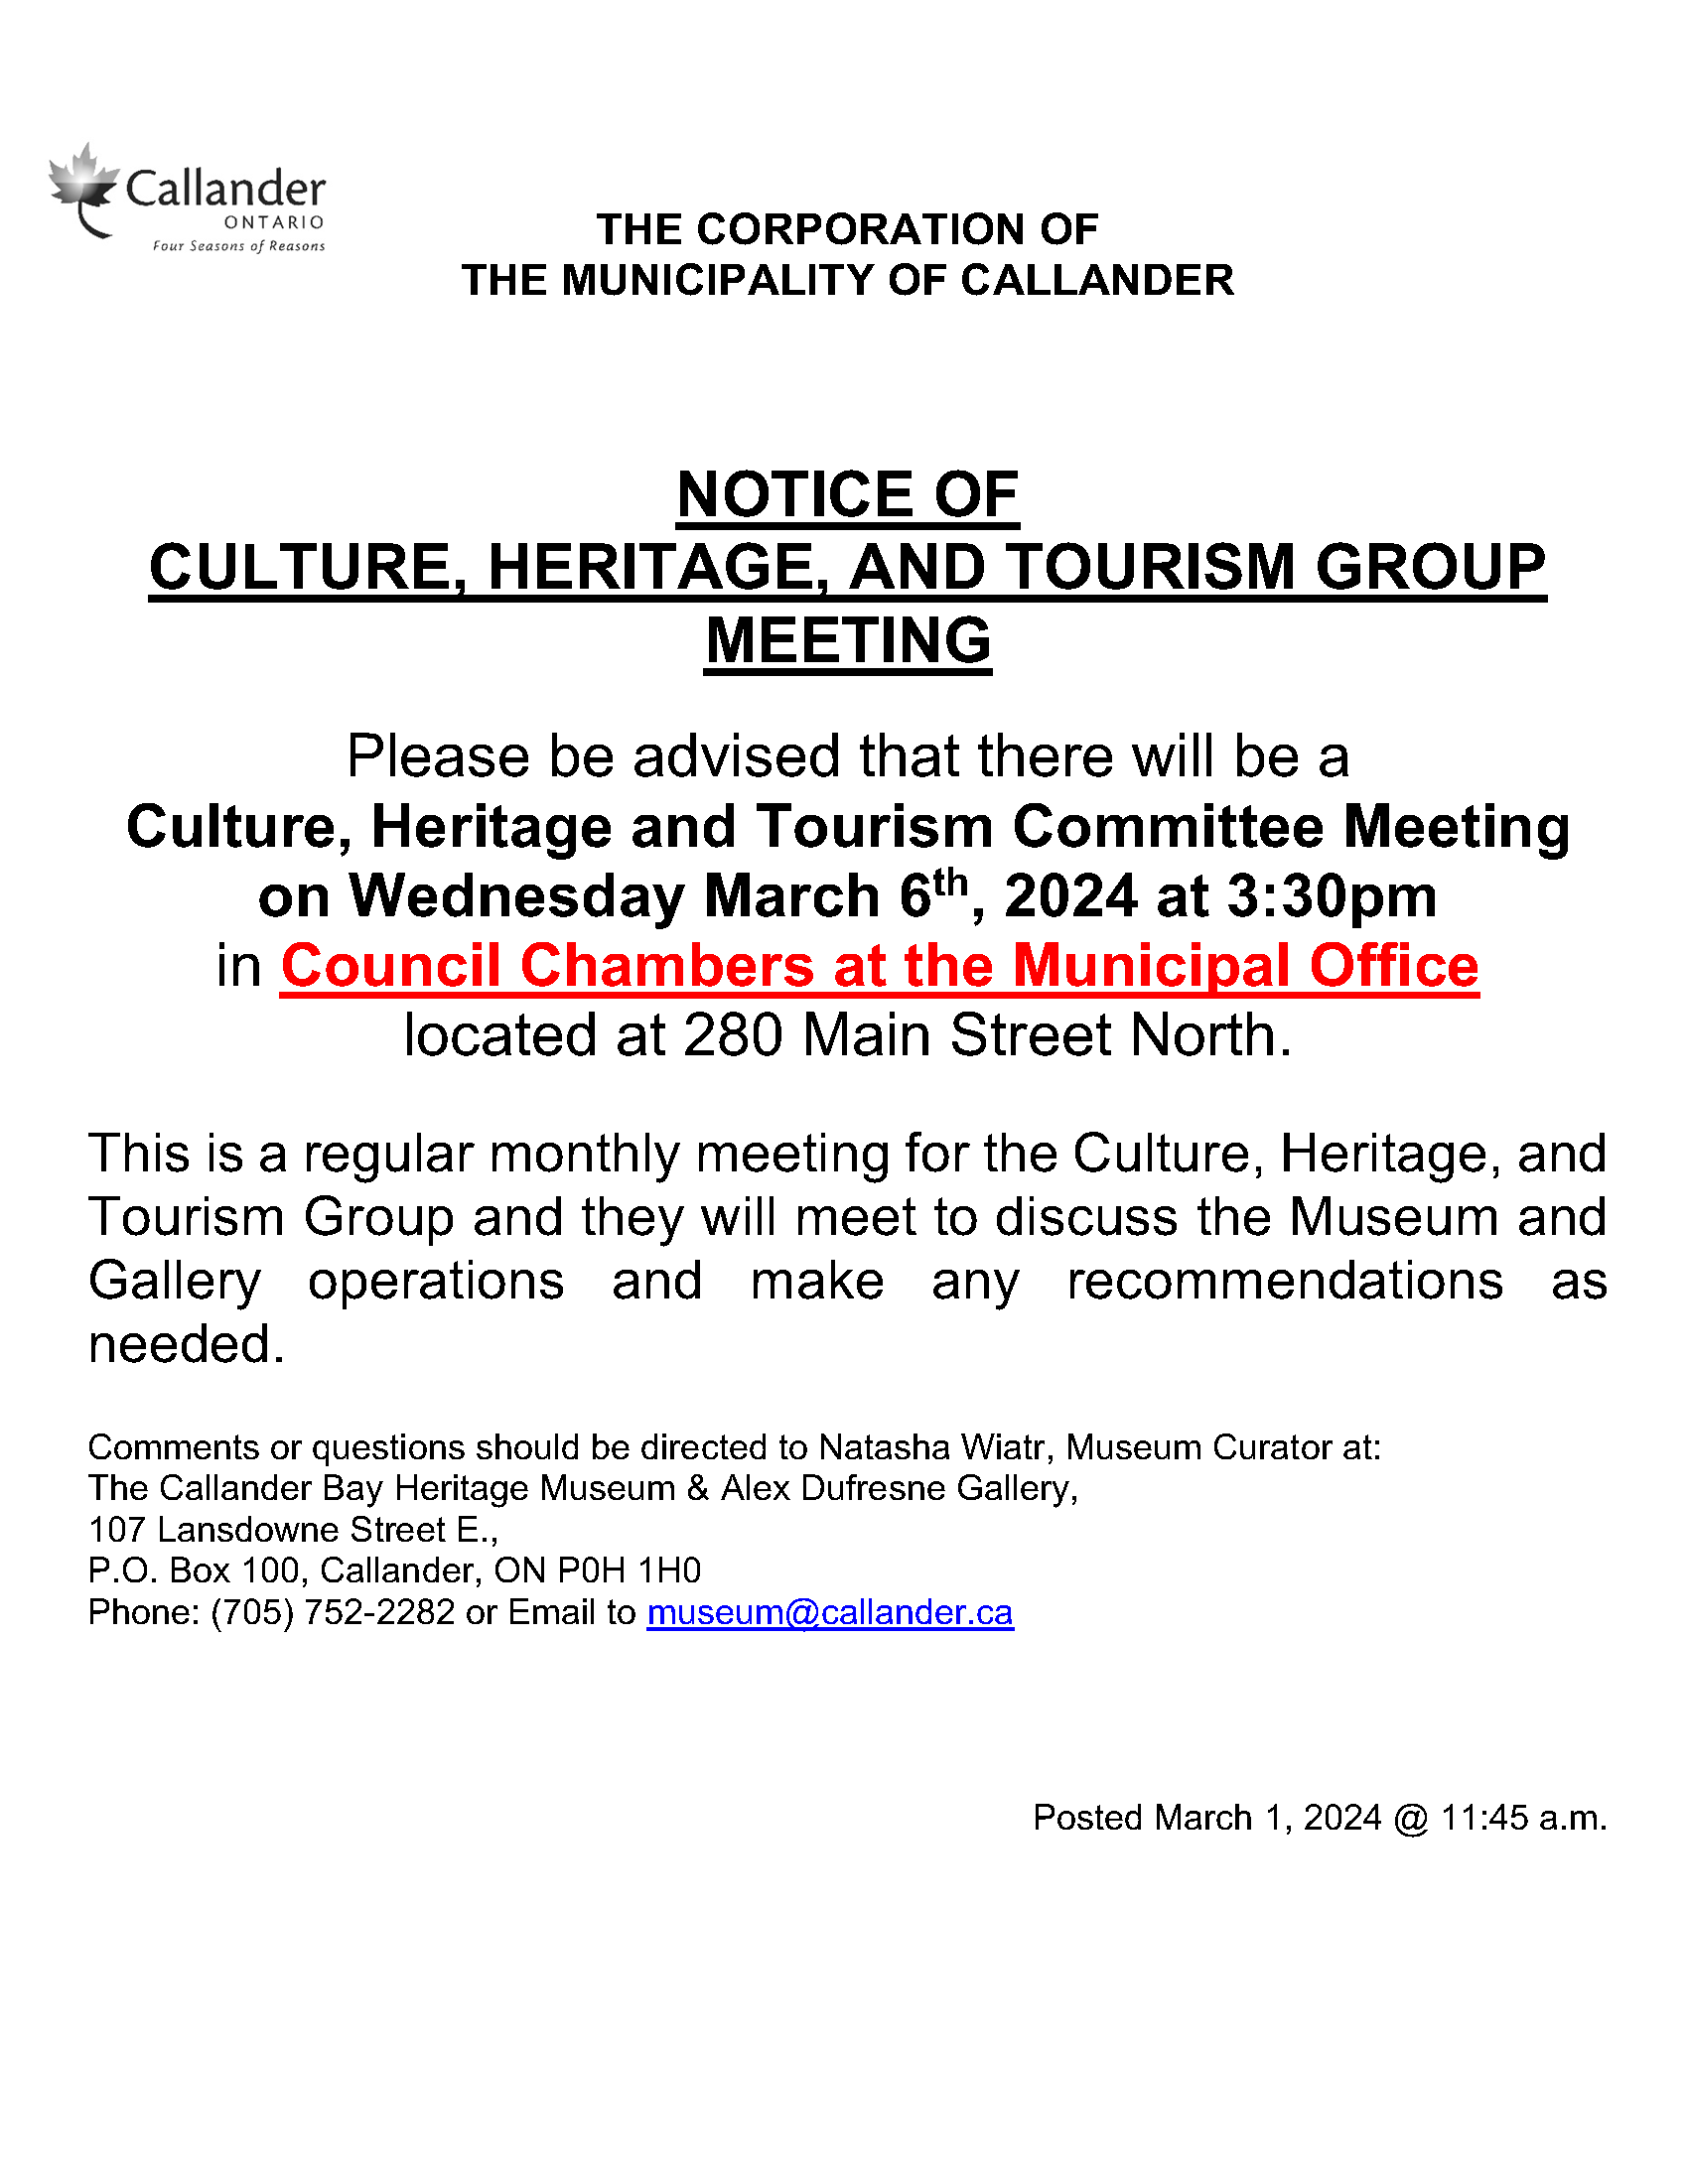 NOTICE OF CULTURE, HERITAGE, AND TOURISM GROUP MEETING